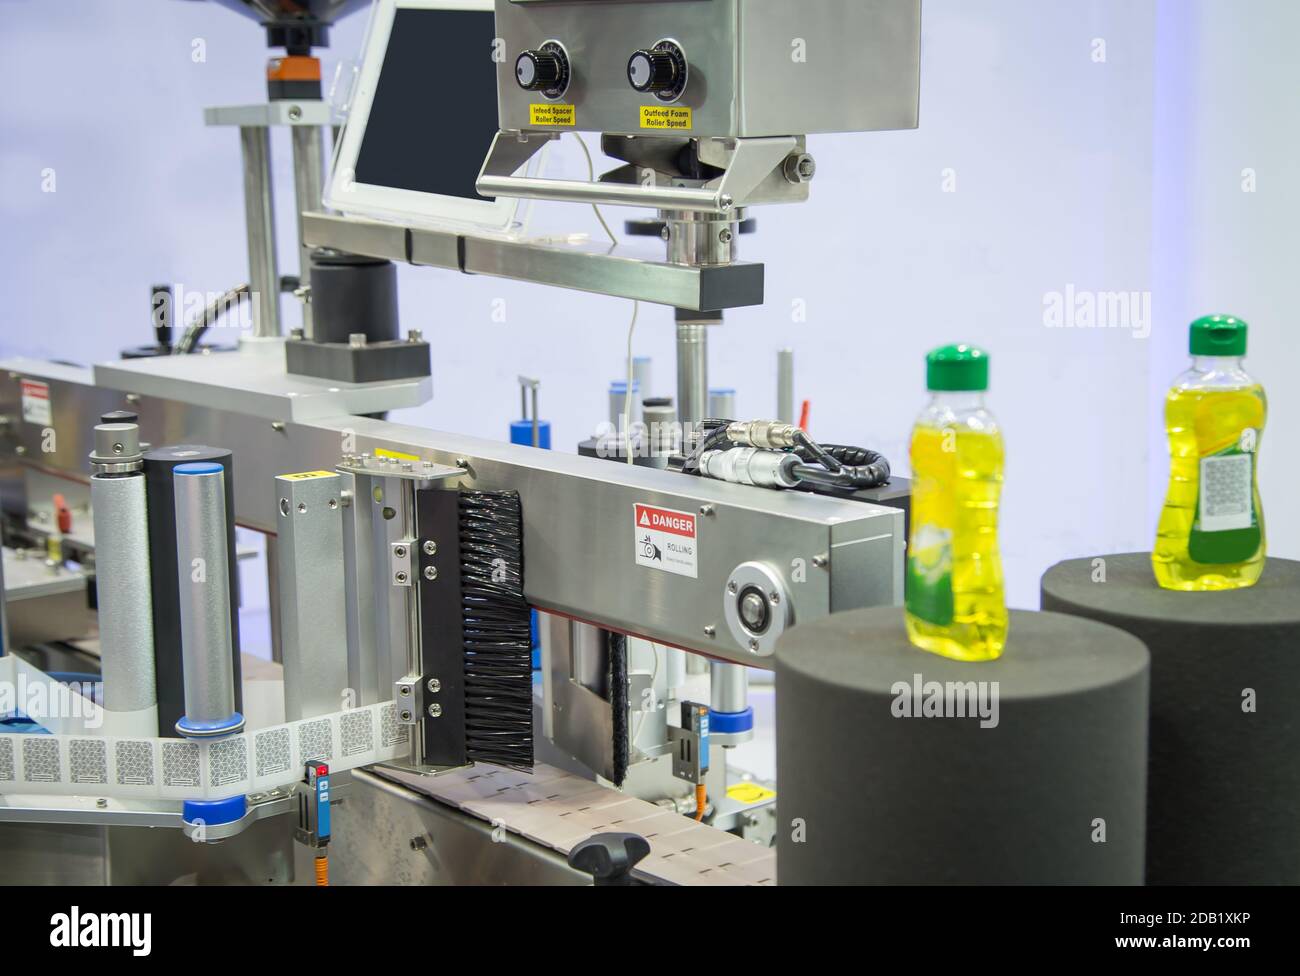 Sample products on bottle labeling machine in industrial machinery Stock Photo